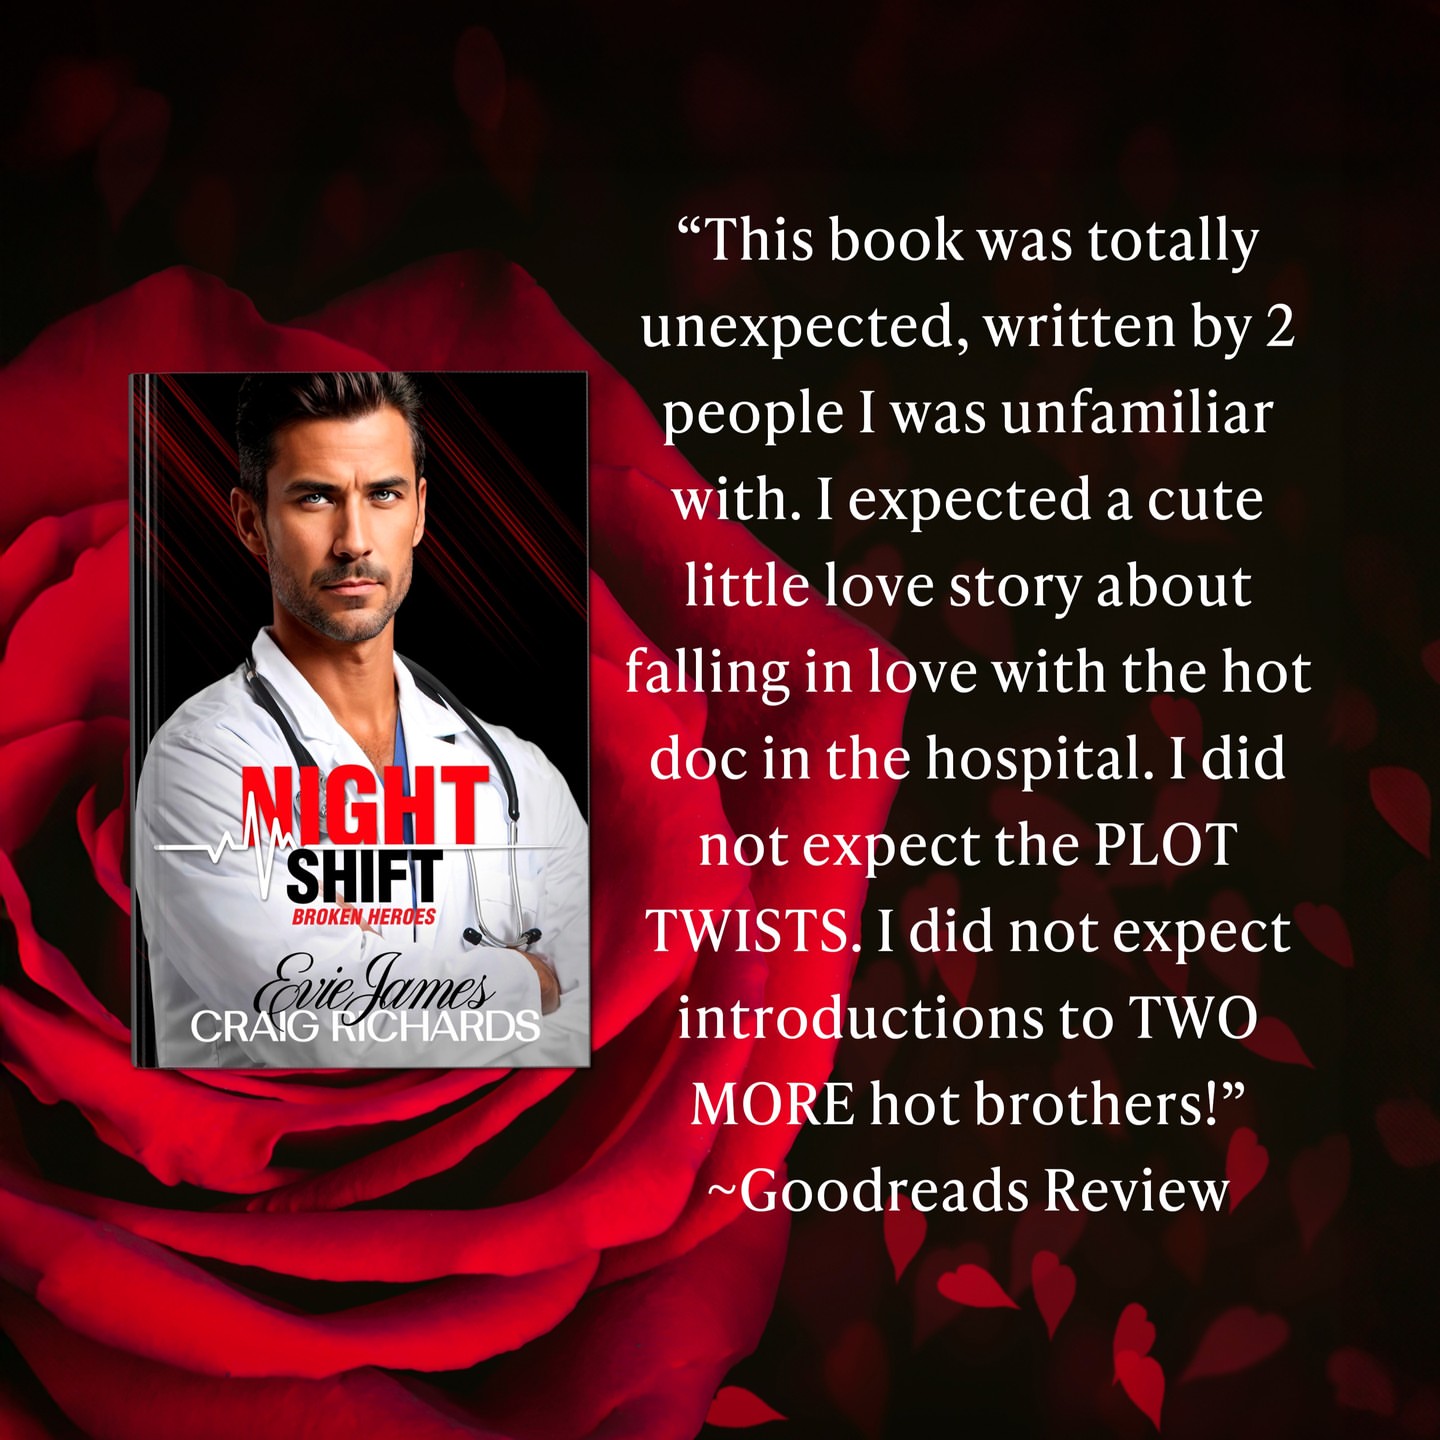 💋do you read and leave reviews?

I love reviewing books I read! It’s so helpful for the authors. Here are some thoughts about Night Shift from readers posting on Goodreads! 😍

aka.craig.richards and I are so happy with the feedback. Thank you for taking the time to review NIGHT SHIFT!

🩺 NIGHT SHIFT is available now on KU and Audiobook! Check out the link in my bio. 🥰

#romancereaders #eviejames #audiobook #nightshift #romance #spicybooks #medicalromance #workplaceromance #bookstagram #bookstagrammer #indieauthor #indiebooks #kindleunlimited